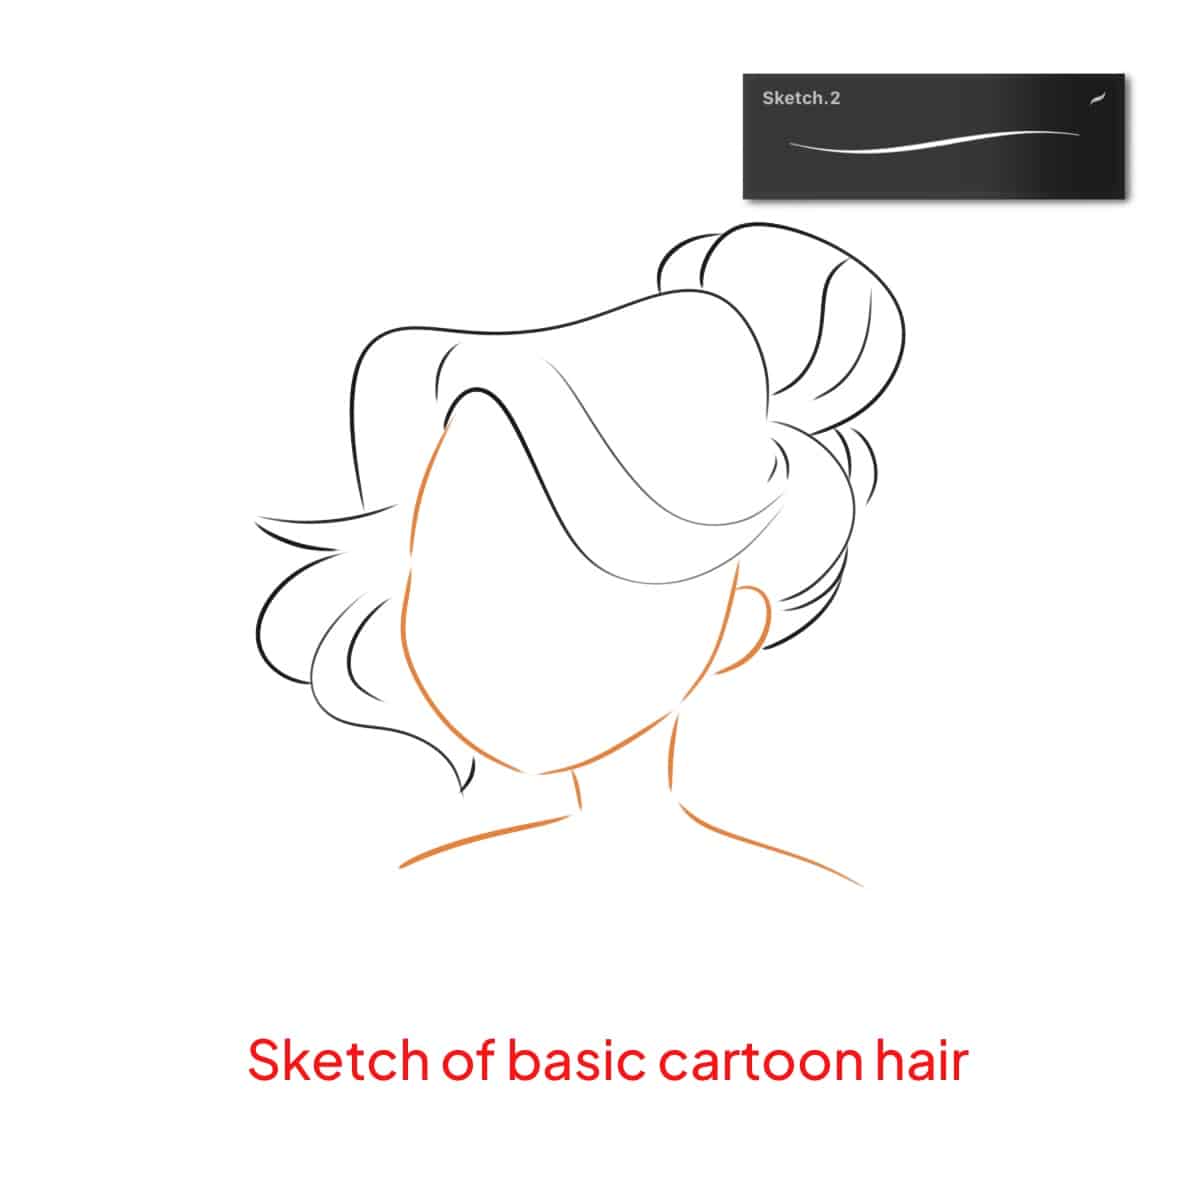 Sketch of a woman's cartoon hair in the Procreate application